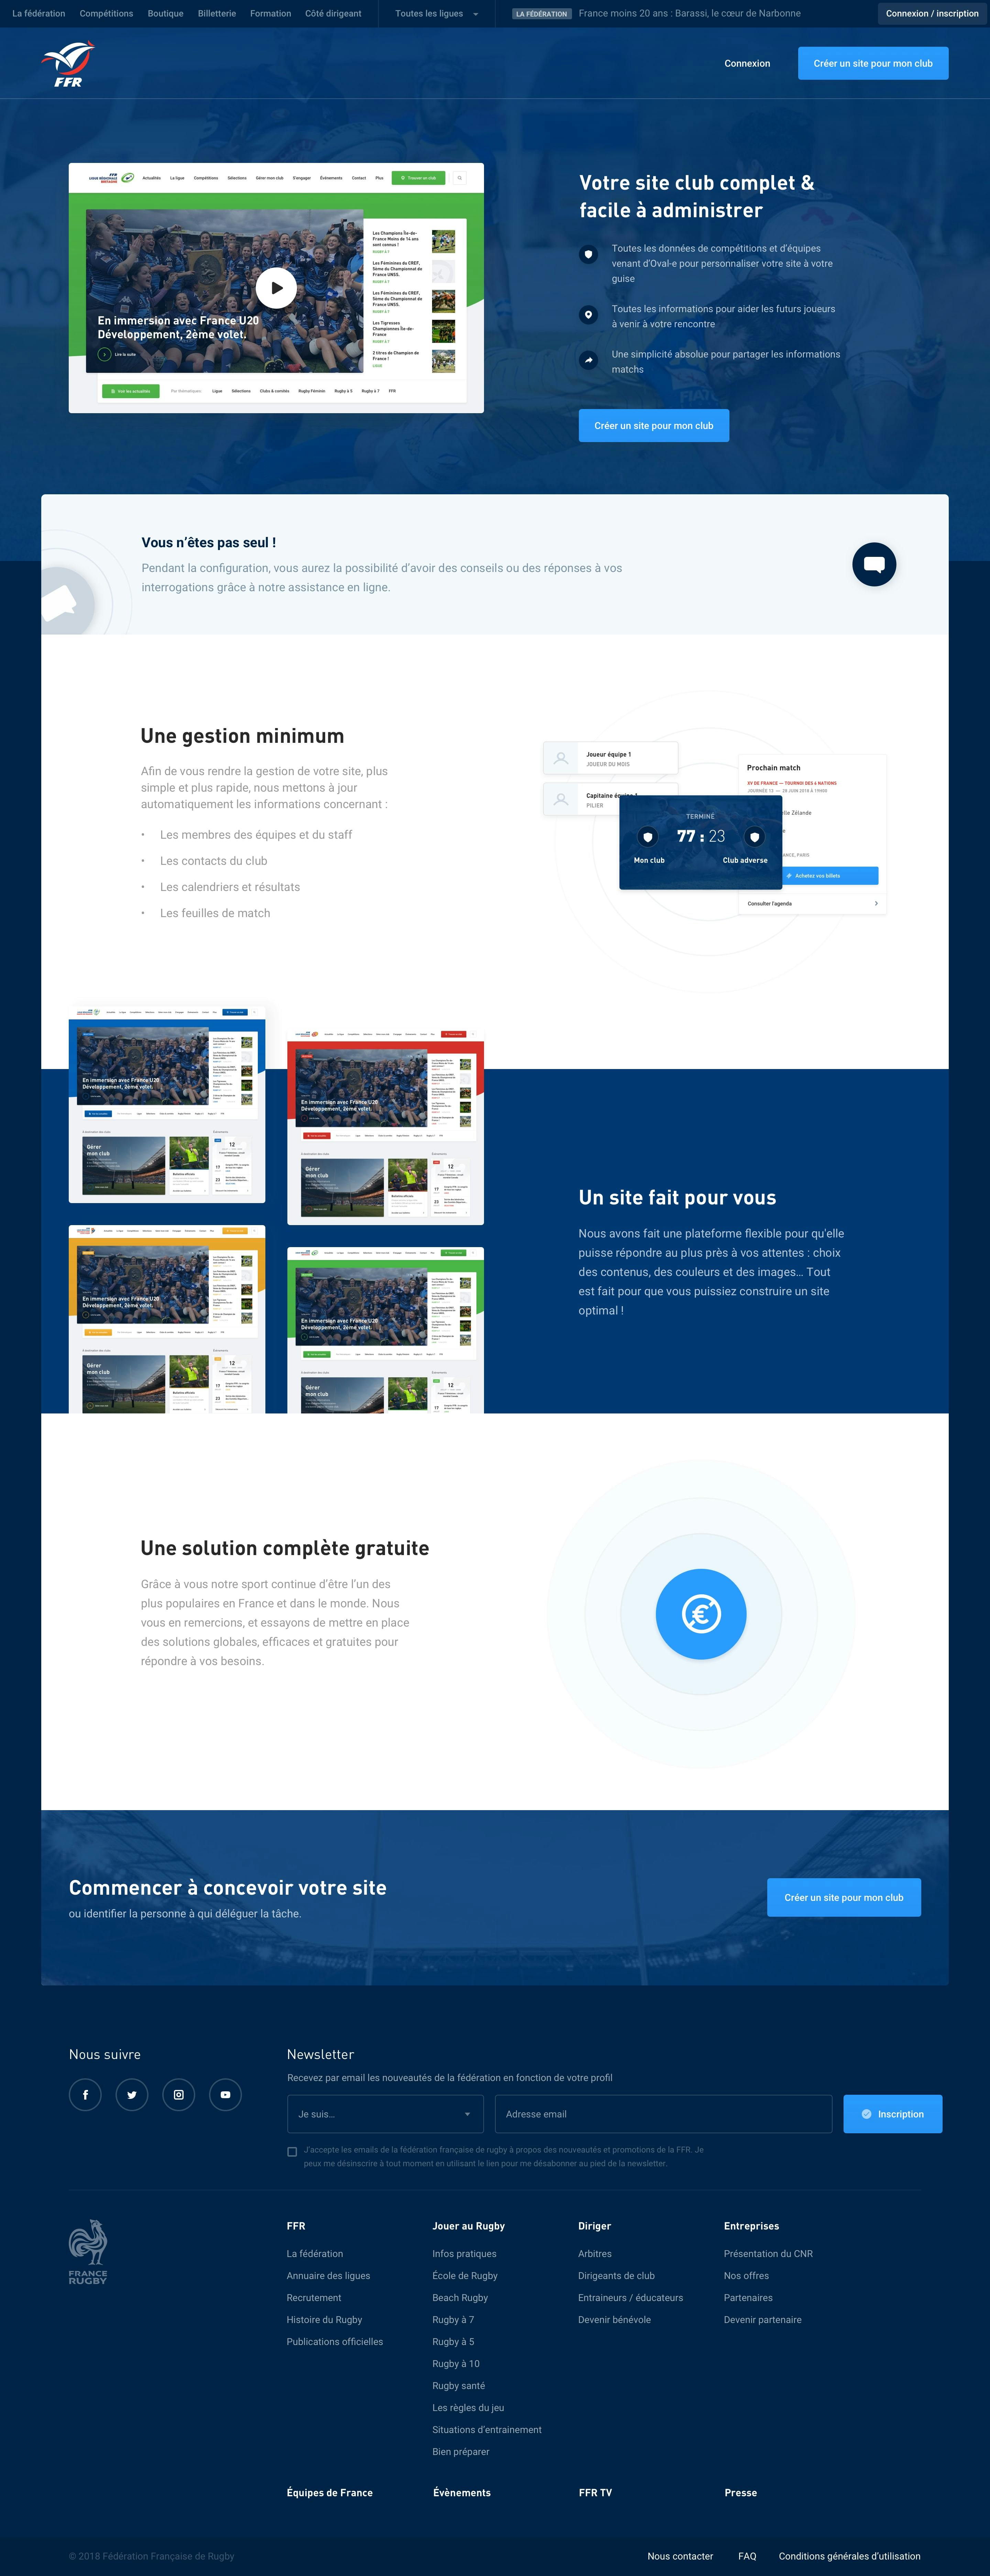 Design of websites for french rugby clubs